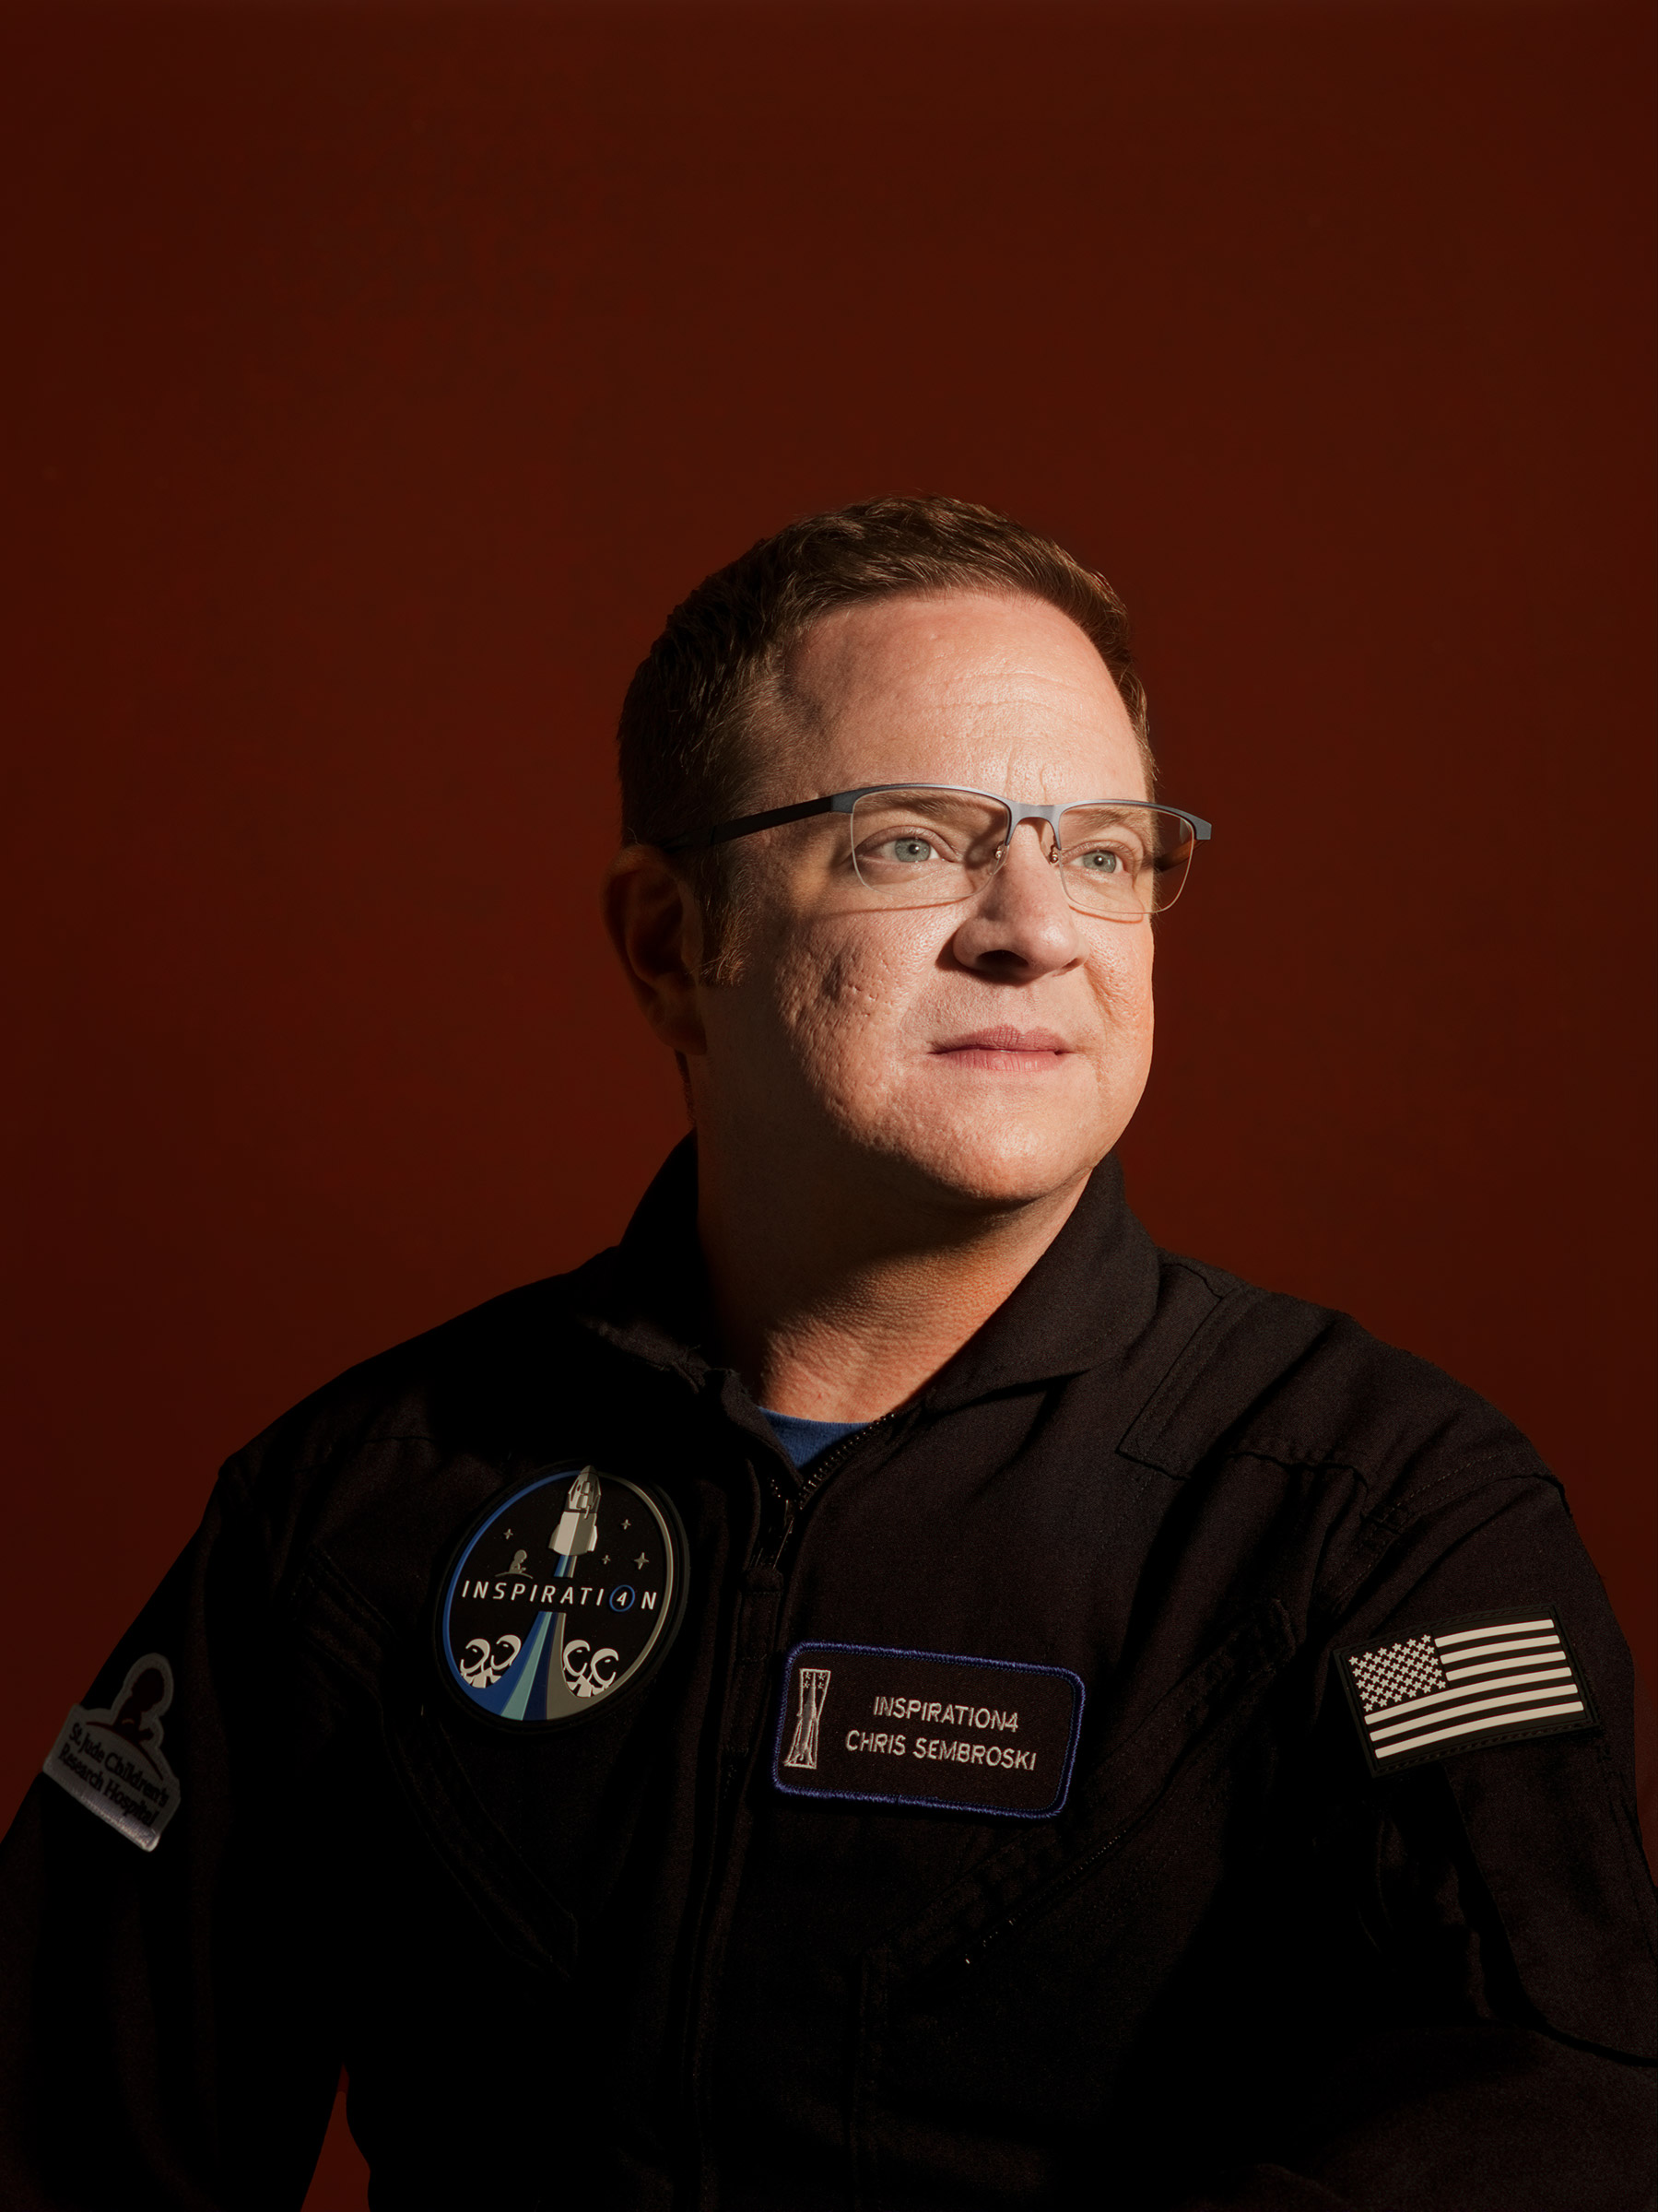 Chris Sembroski of the Inspiration4 crew, the world's first all-civilian mission to orbit. (Philip Montgomery for TIME)